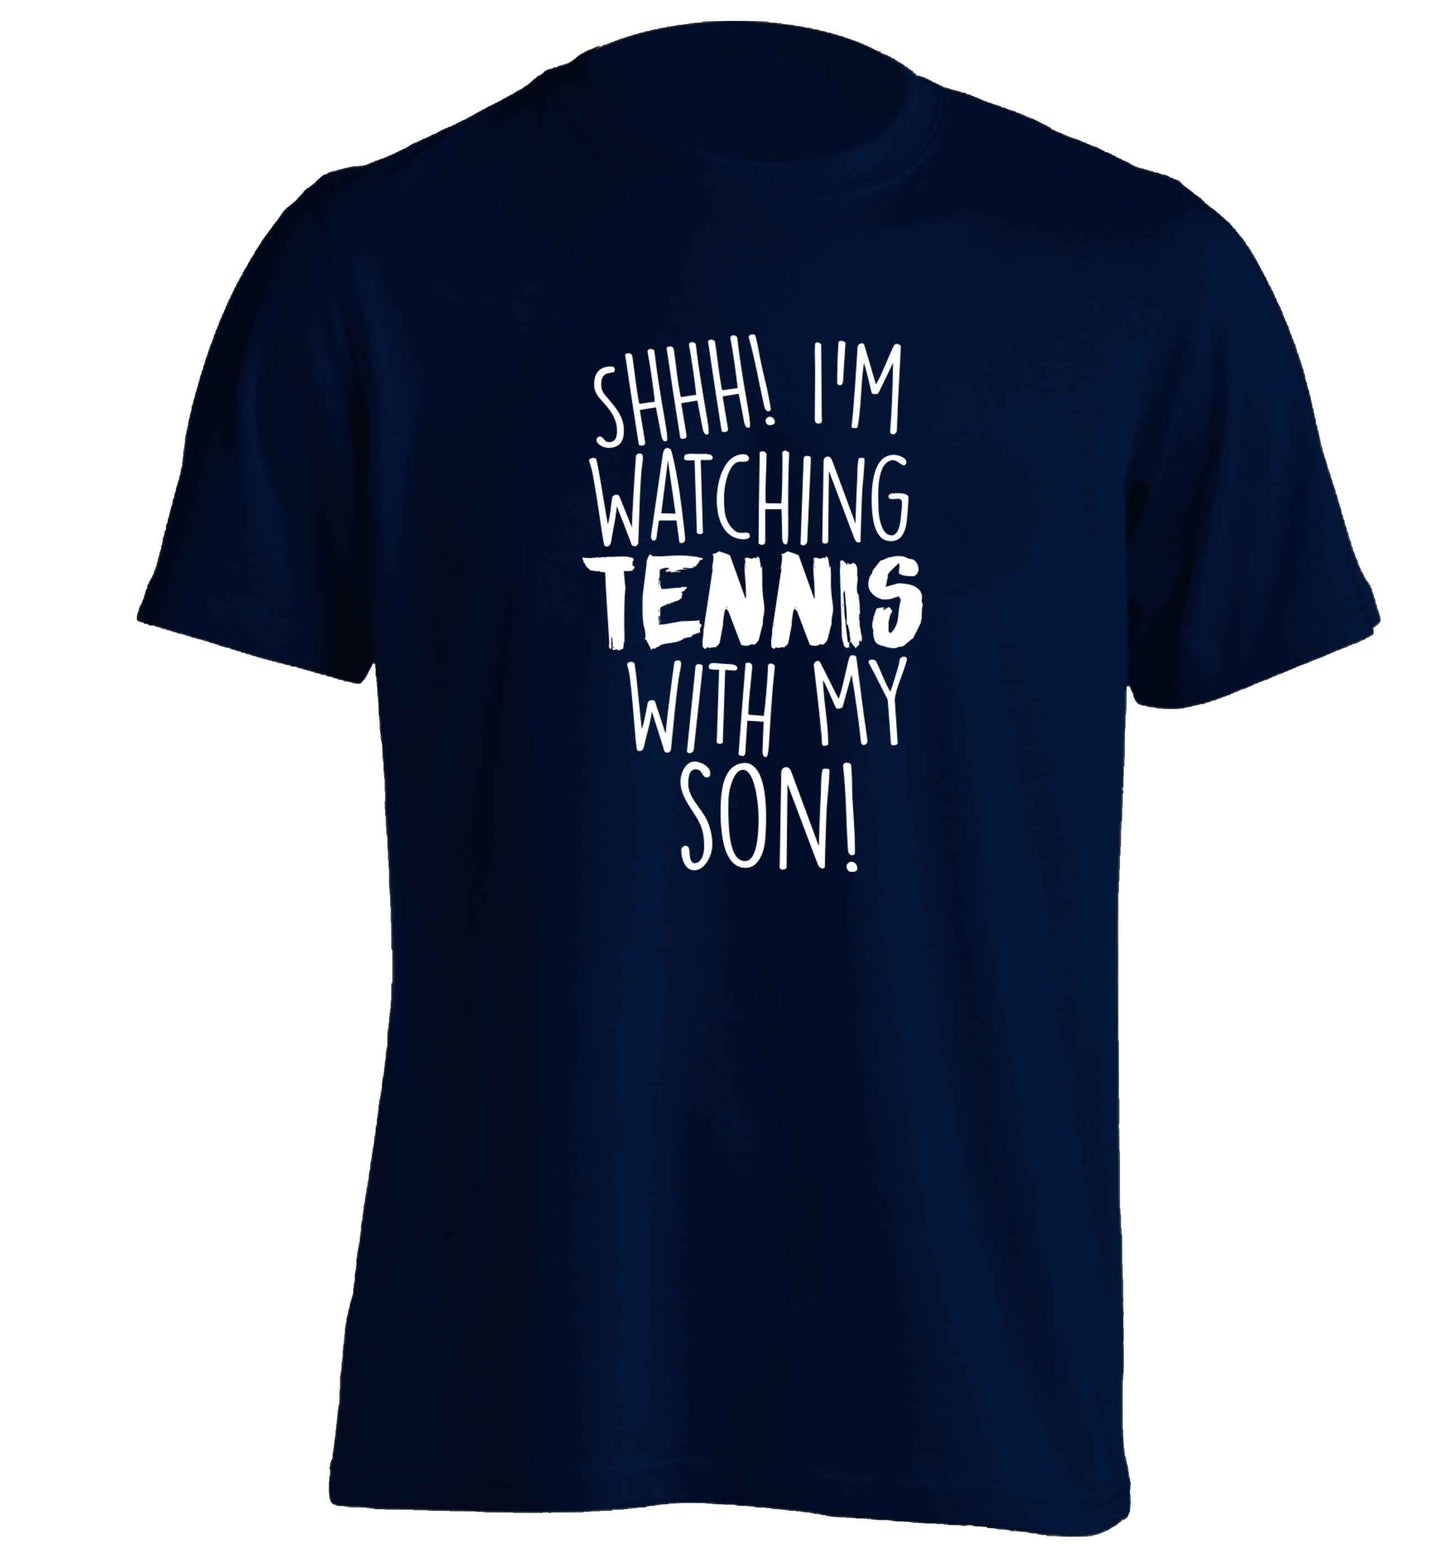 Shh! I'm watching tennis with my son! adults unisex navy Tshirt 2XL